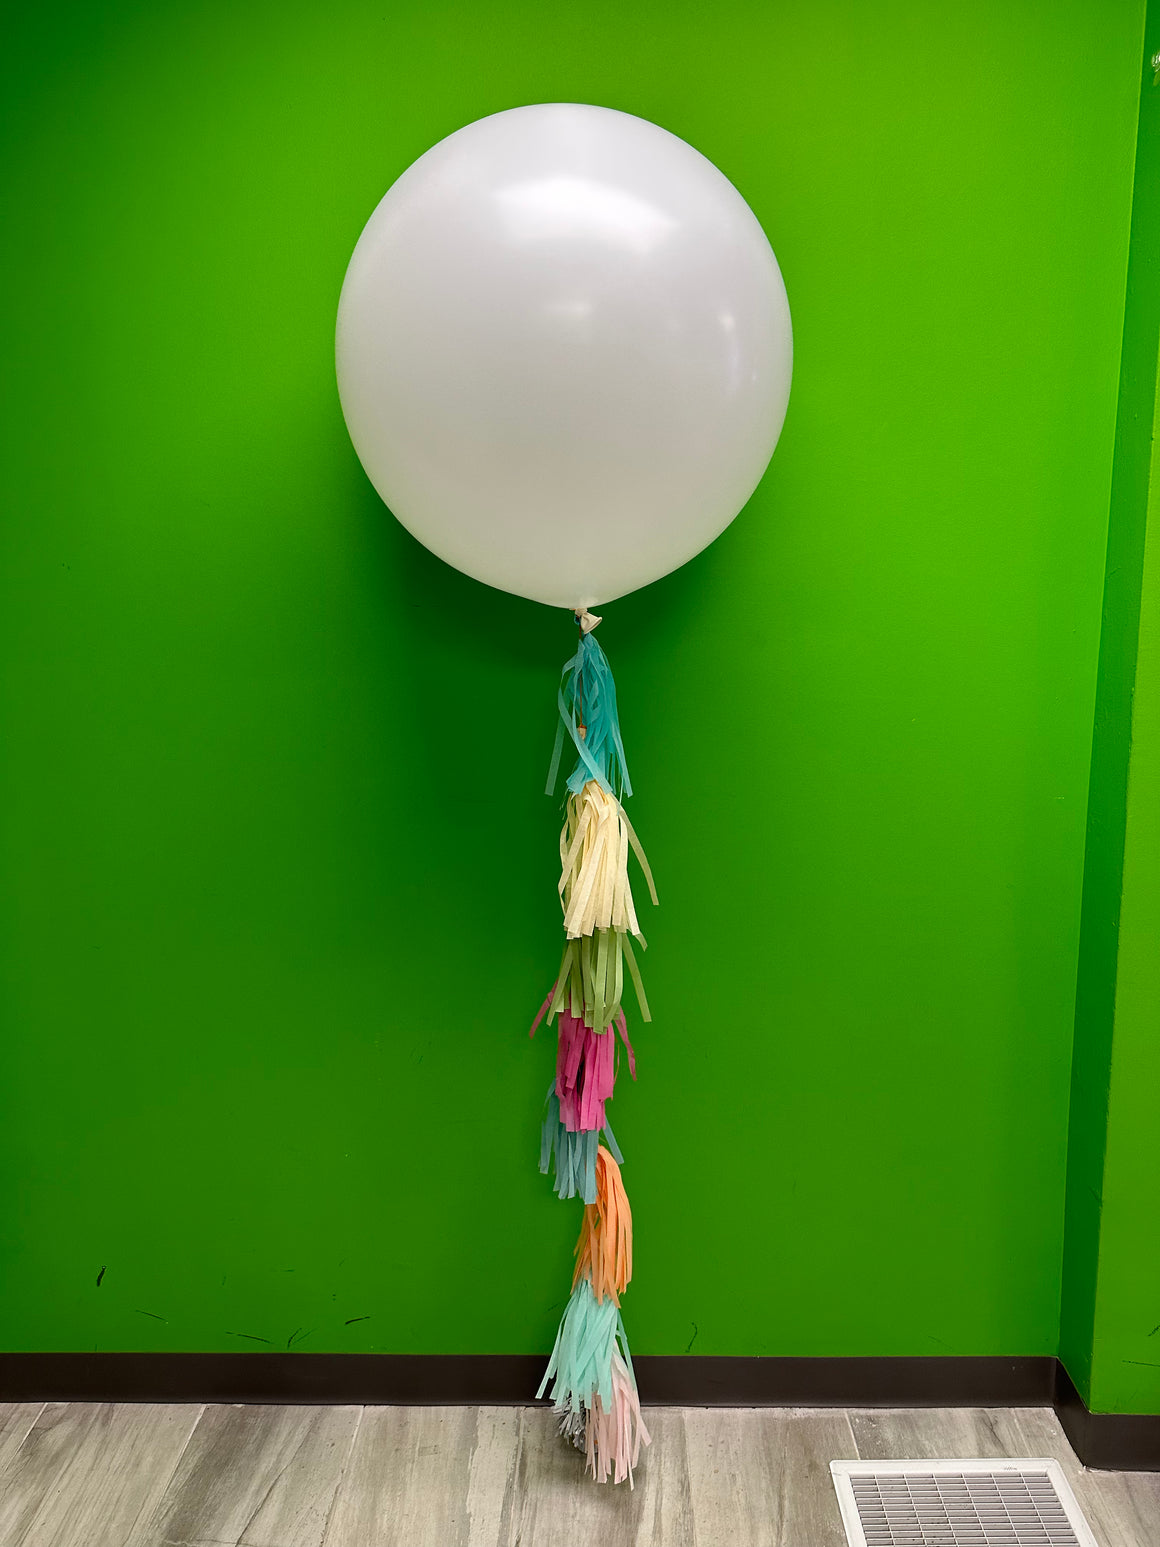 Big balloon with a full tassel tail